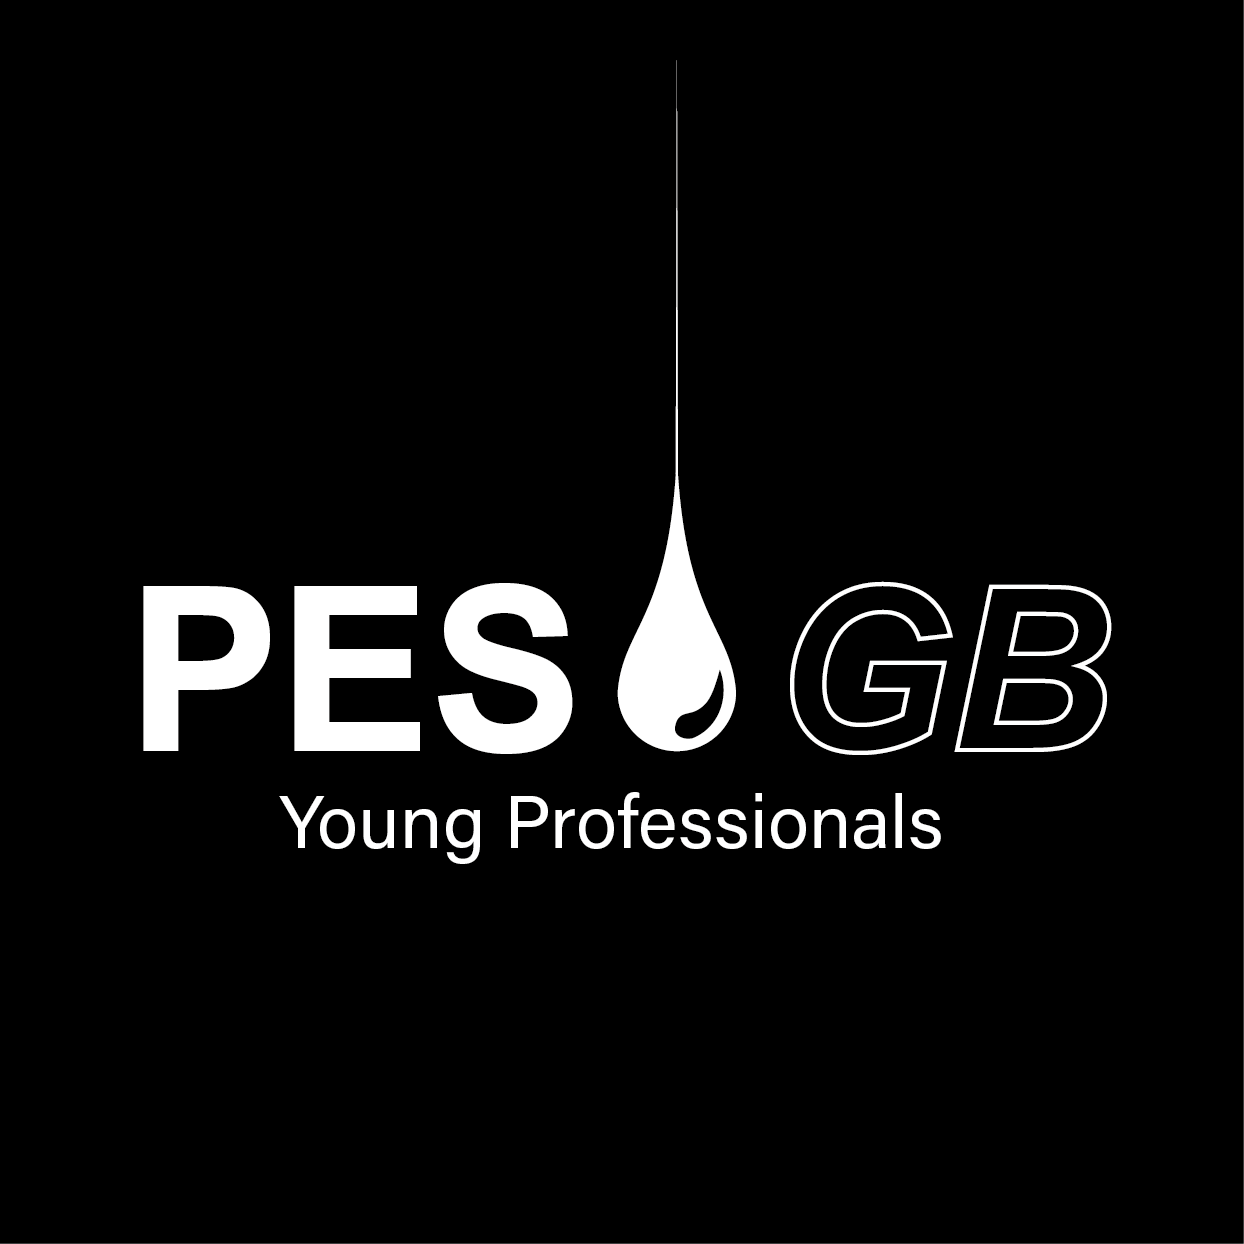 PESGB 2018 House of Commons Panel Discussion